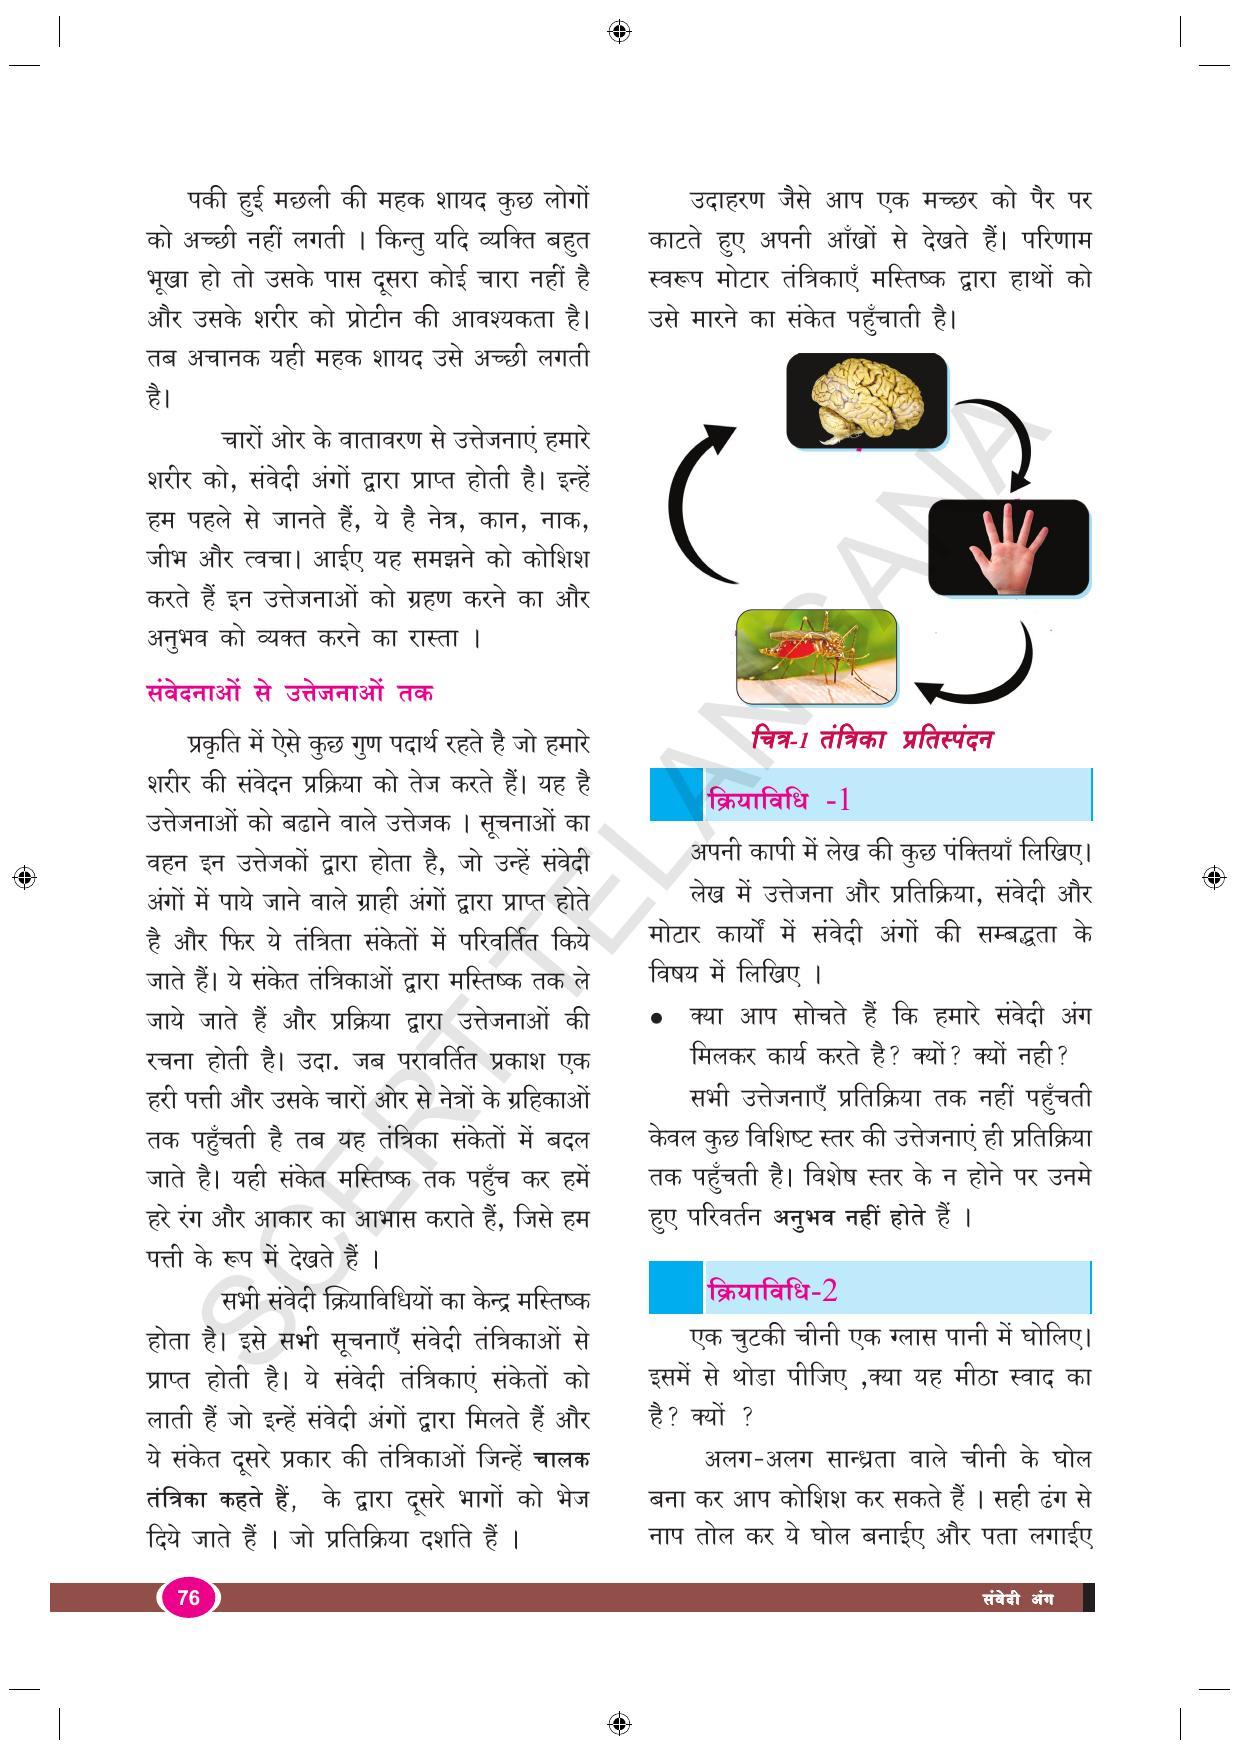 TS SCERT Class 9 Biological Science (Hindi Medium) Text Book - Page 88